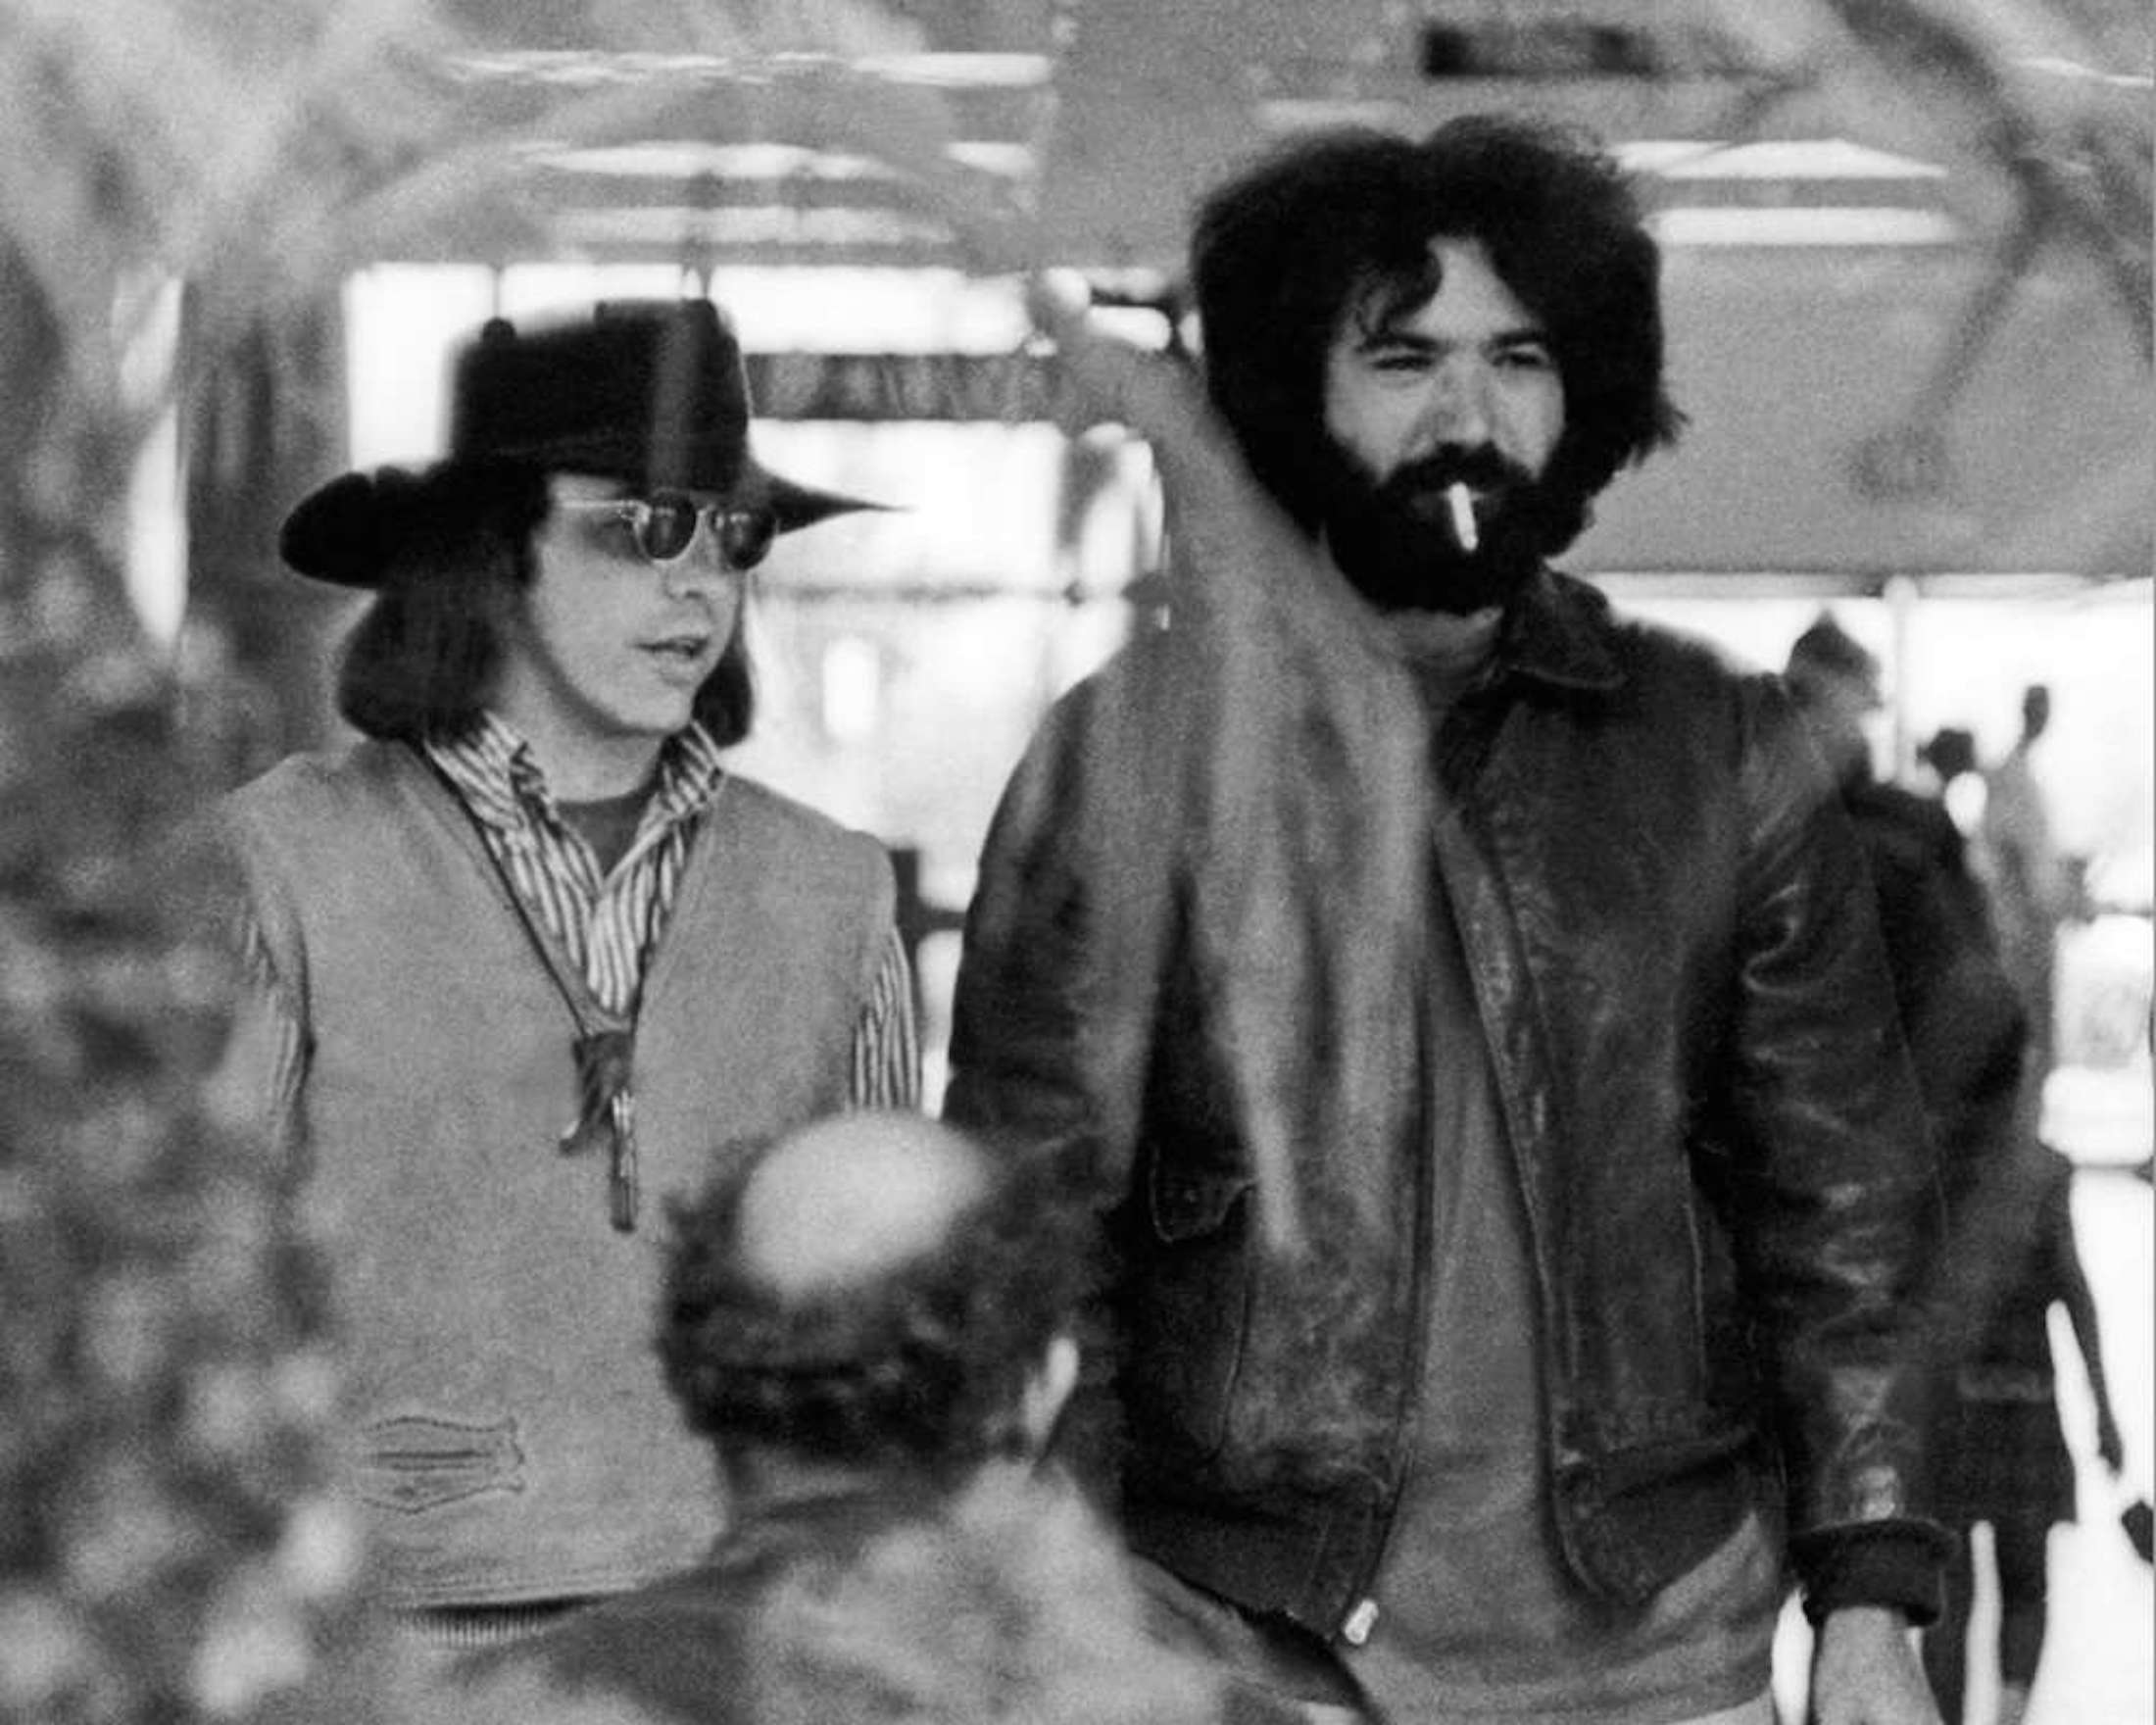 Owsley "Bear" Stanley and Jerry Garcia | Photo Credited to Rosie McGee